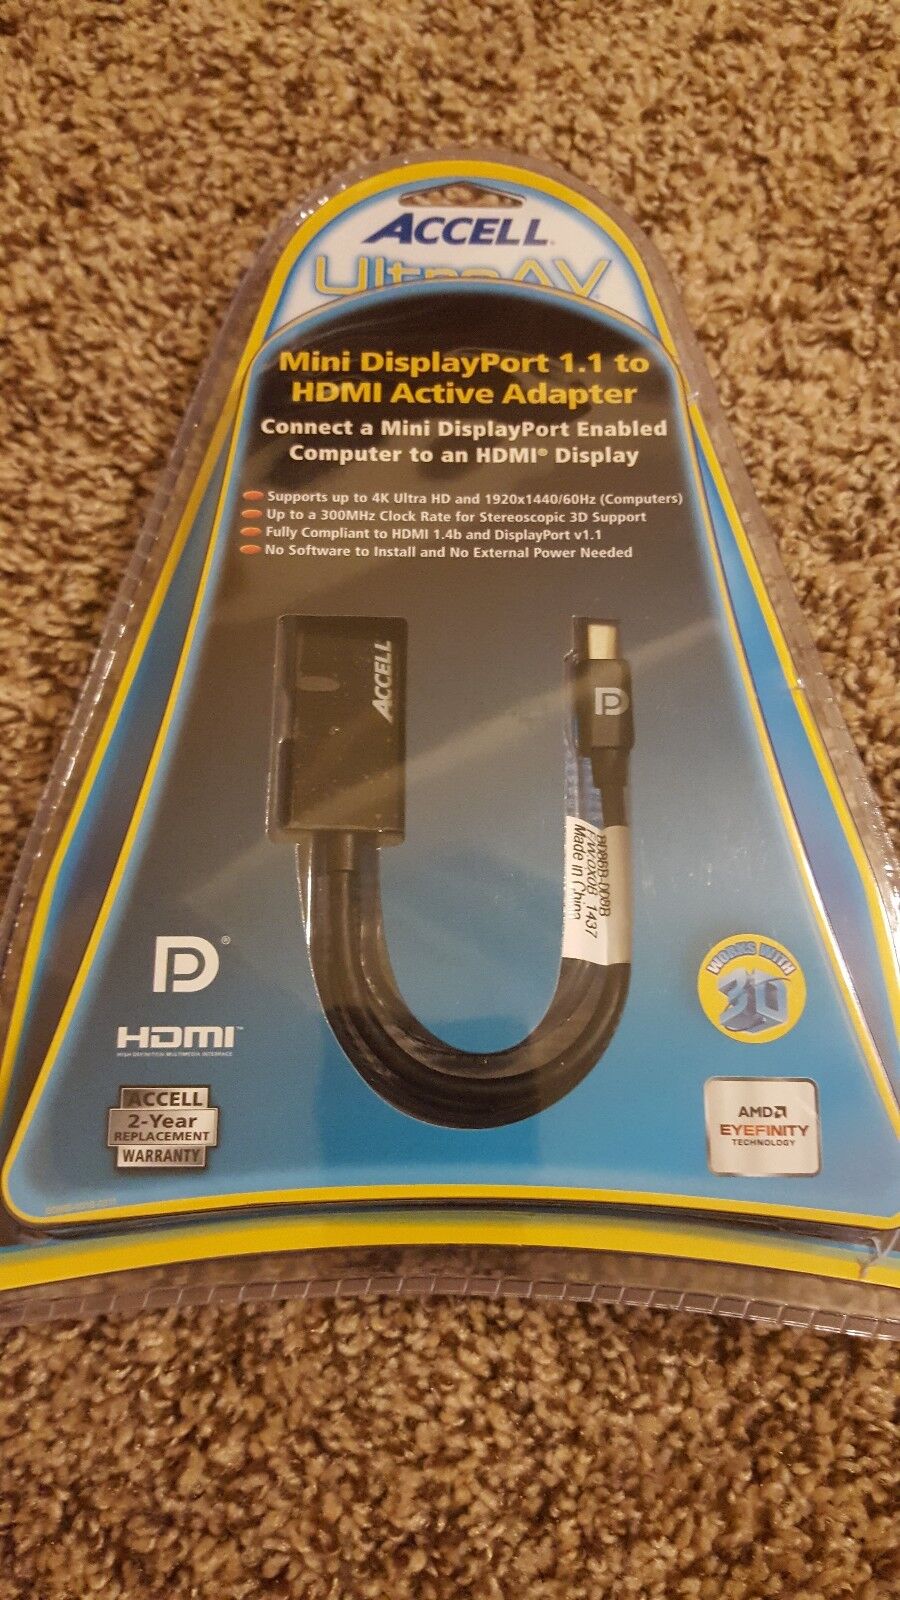 Accell Mini DisplayPort 1.1 to HDMI Active Adapter Video Audi - New in Open Box